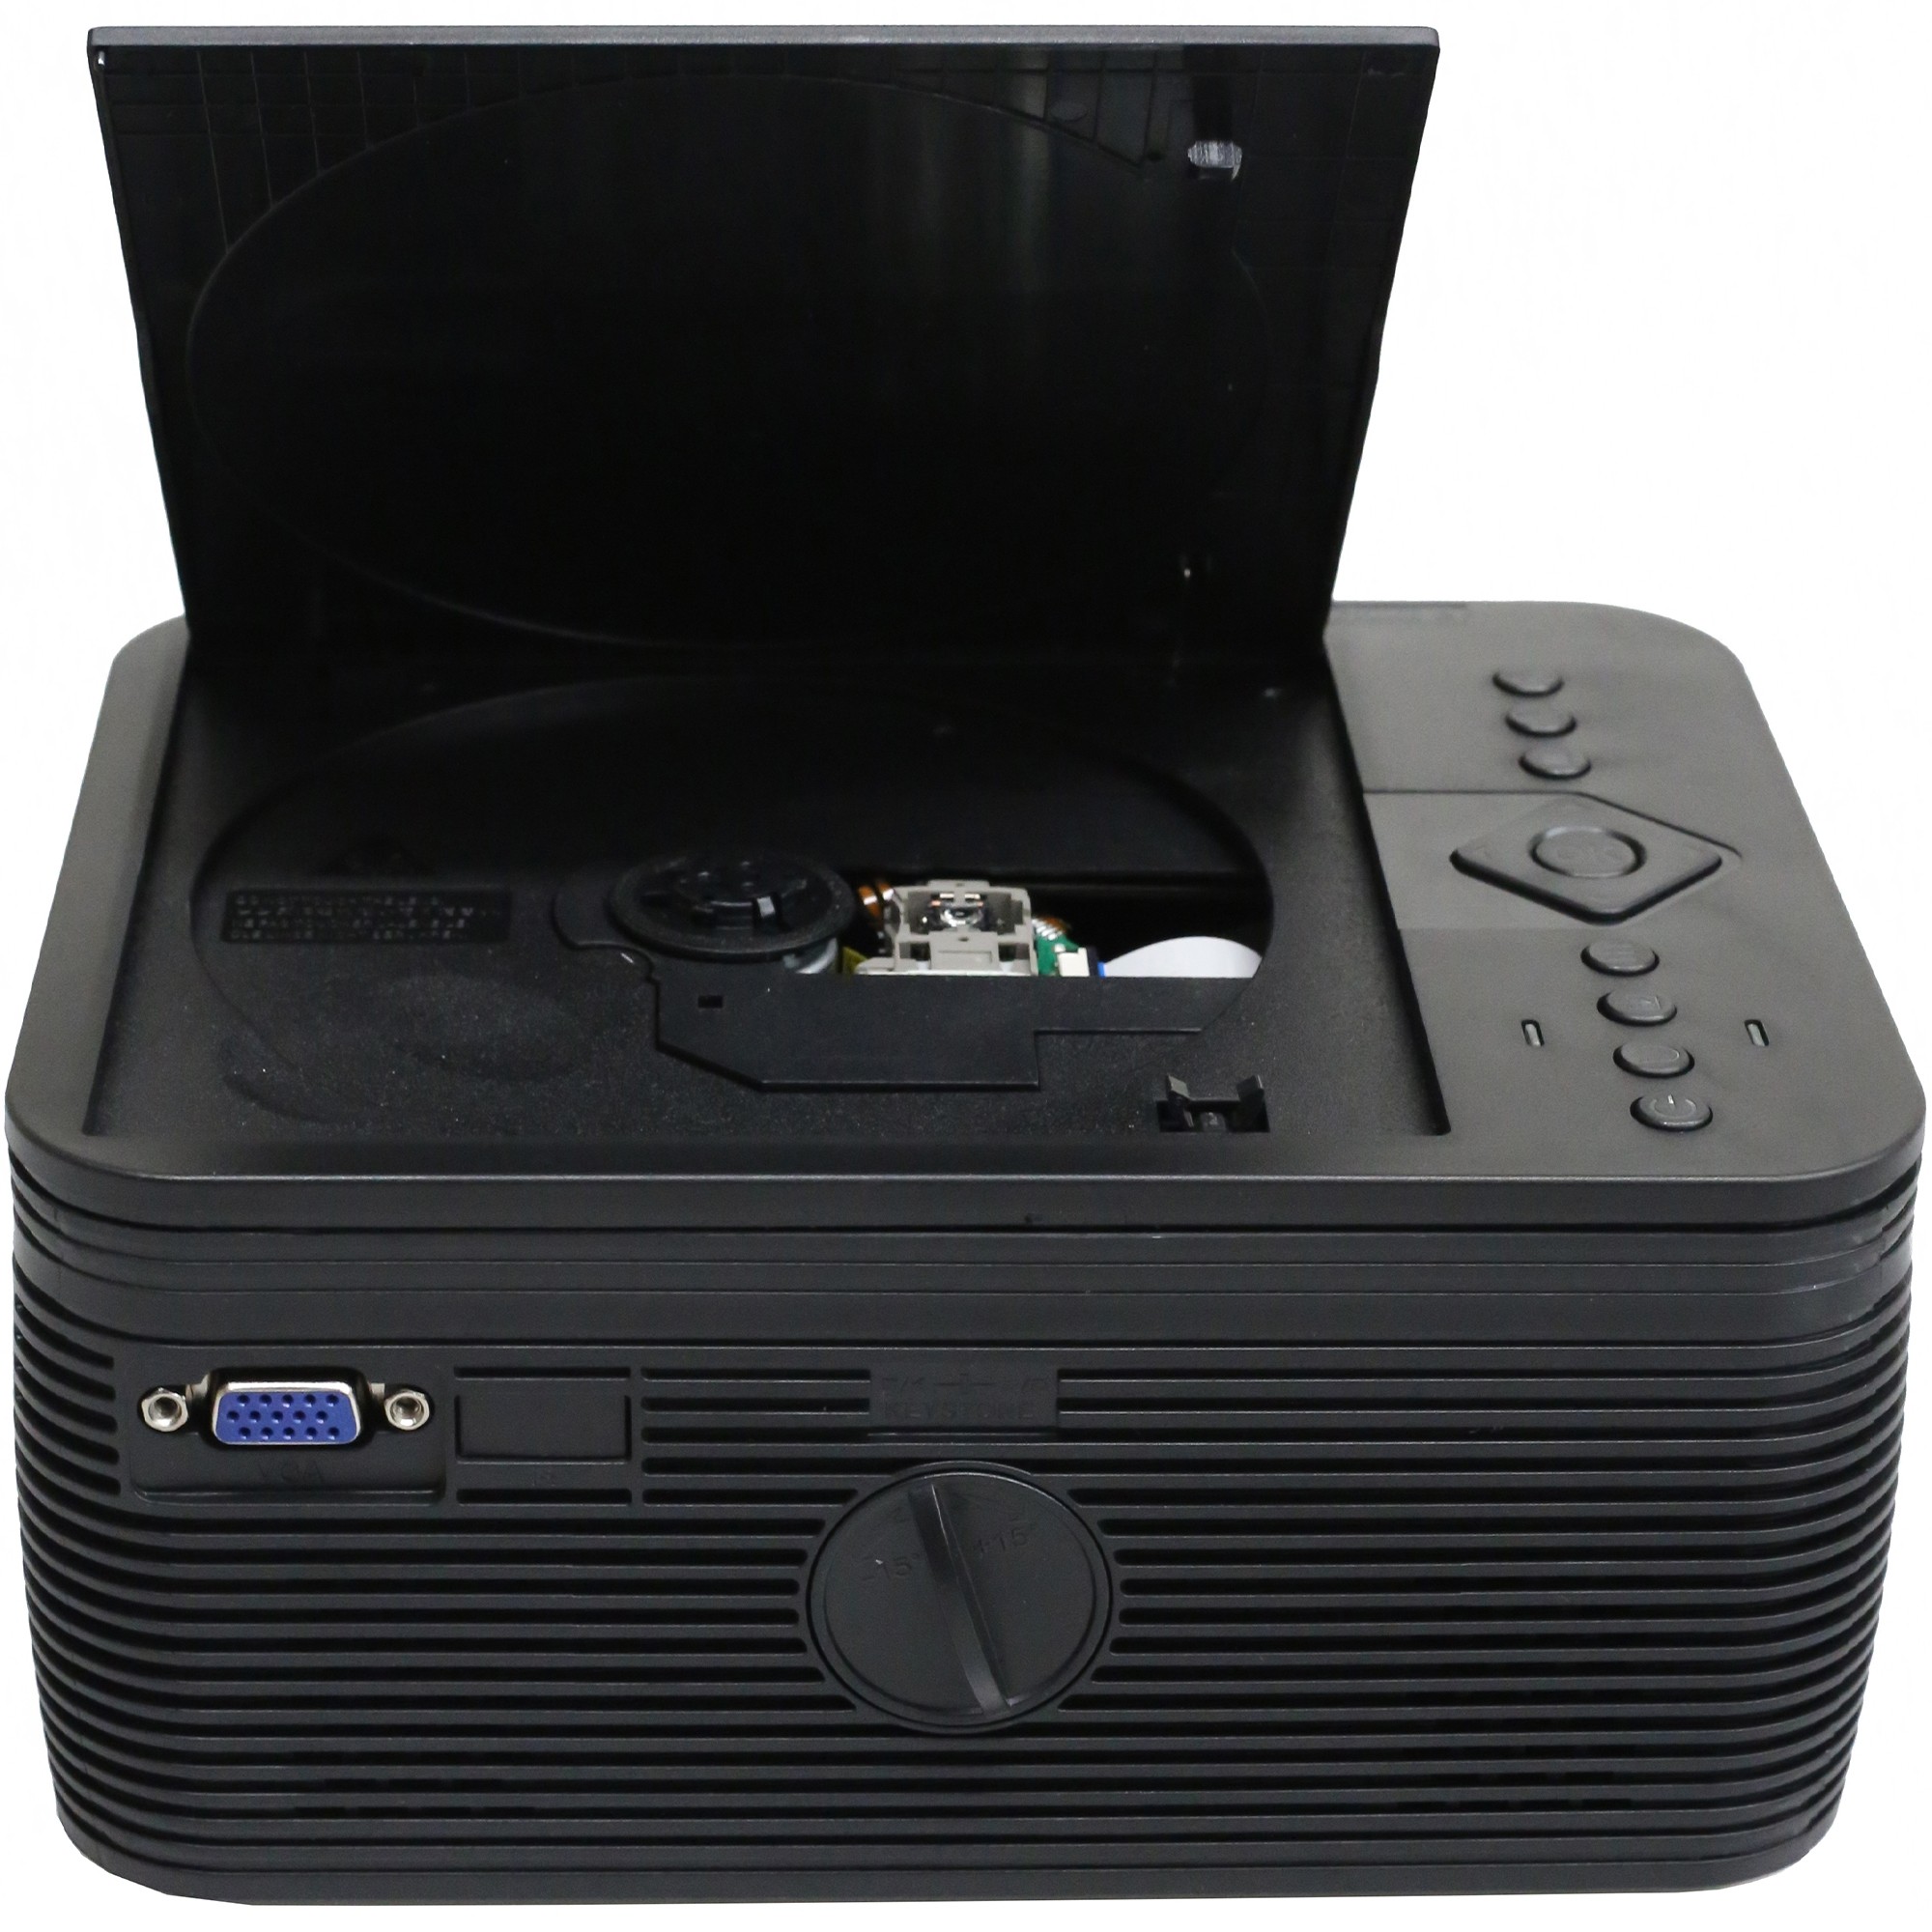 LED Home Theatre Projector (Black)